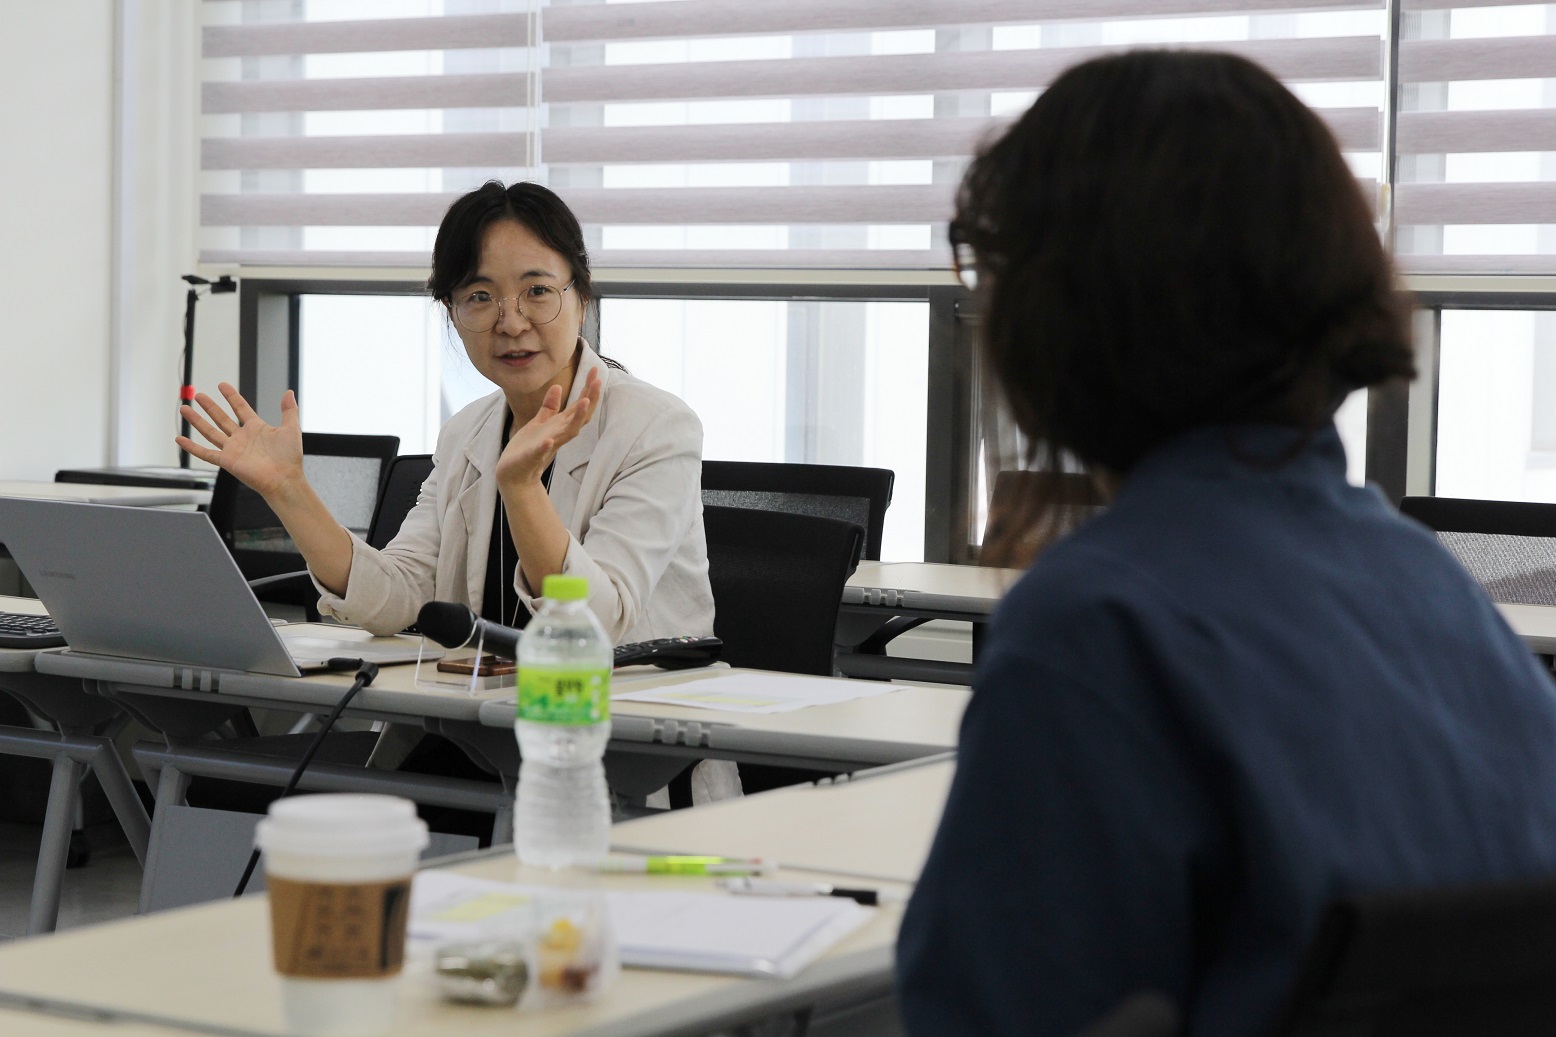 ▲ LEE Boyoung, Research Fellow at the Center for Cognition and Sociality, explaining research results to Henrietta HOWELLS, Senior Editor of Nature Neuroscience
